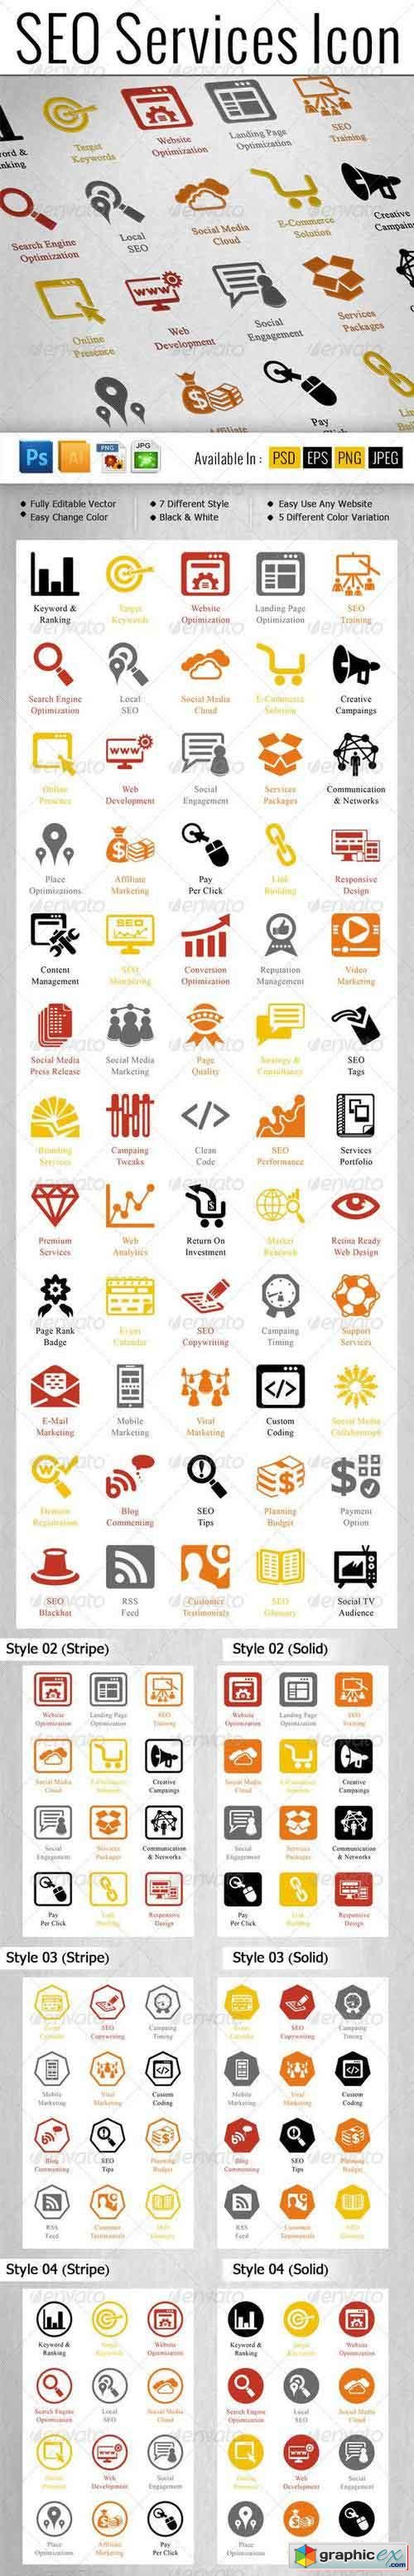 SEO Services Icons Pack